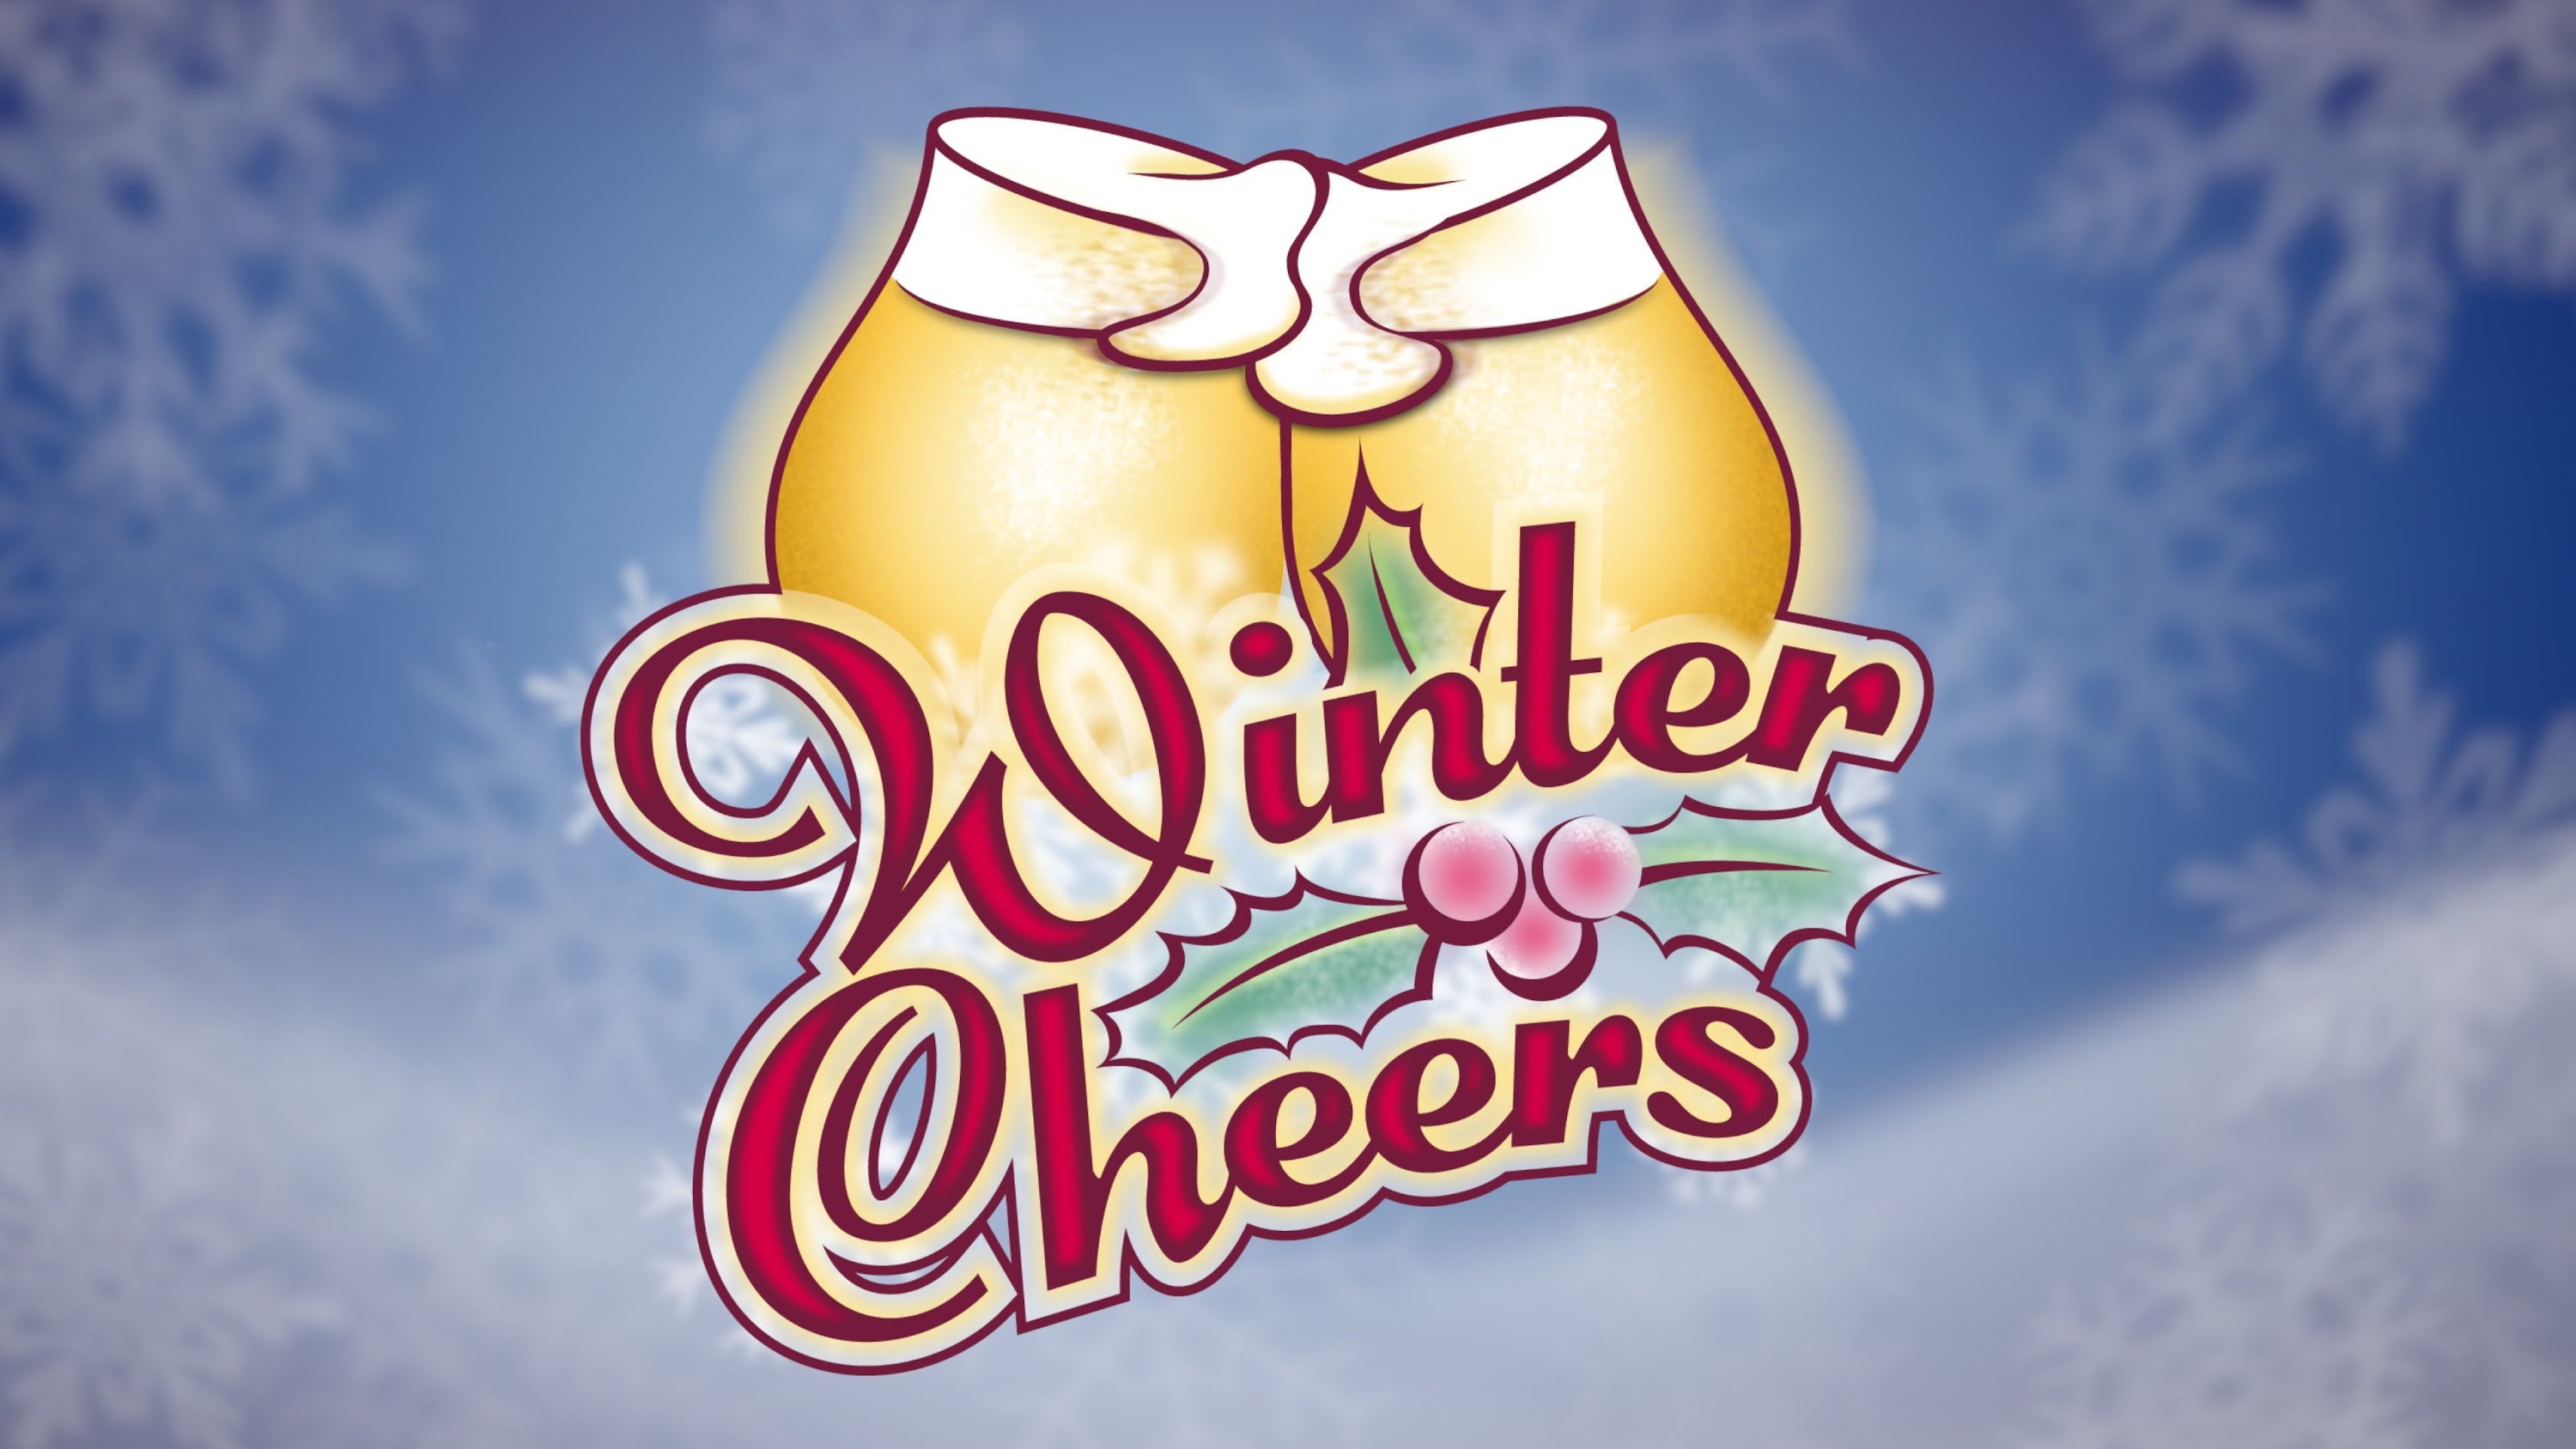 Victory Winter Cheers Wheat Ale - YouTube